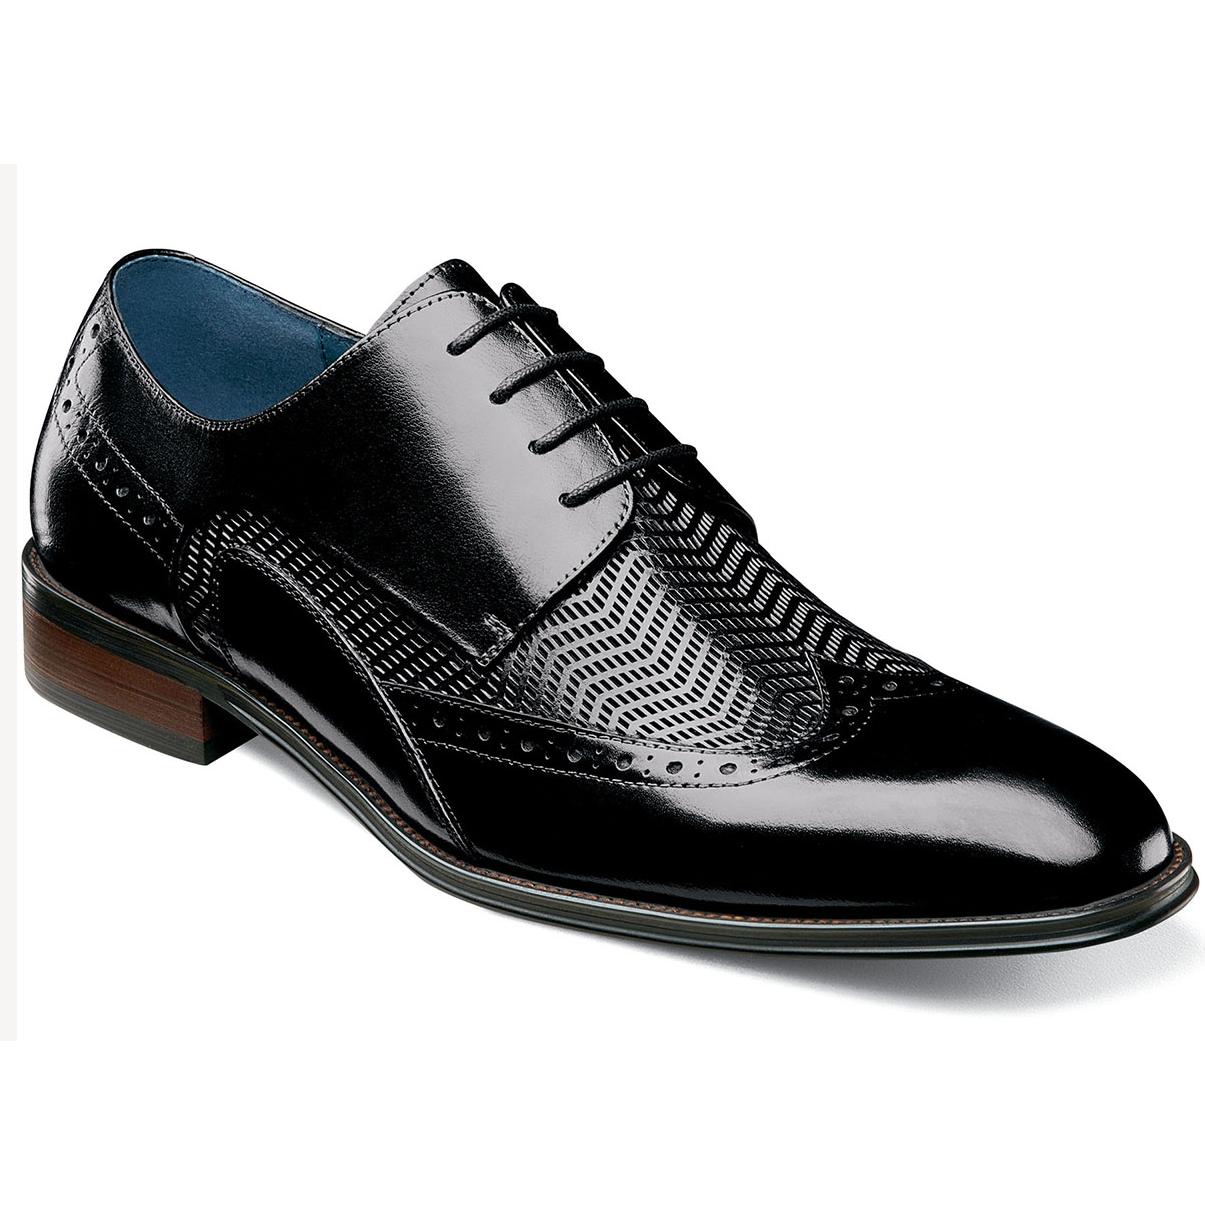 Stacy Adams Maguire Black Genuine Leather Wingtip Shoes 25238-001 ...